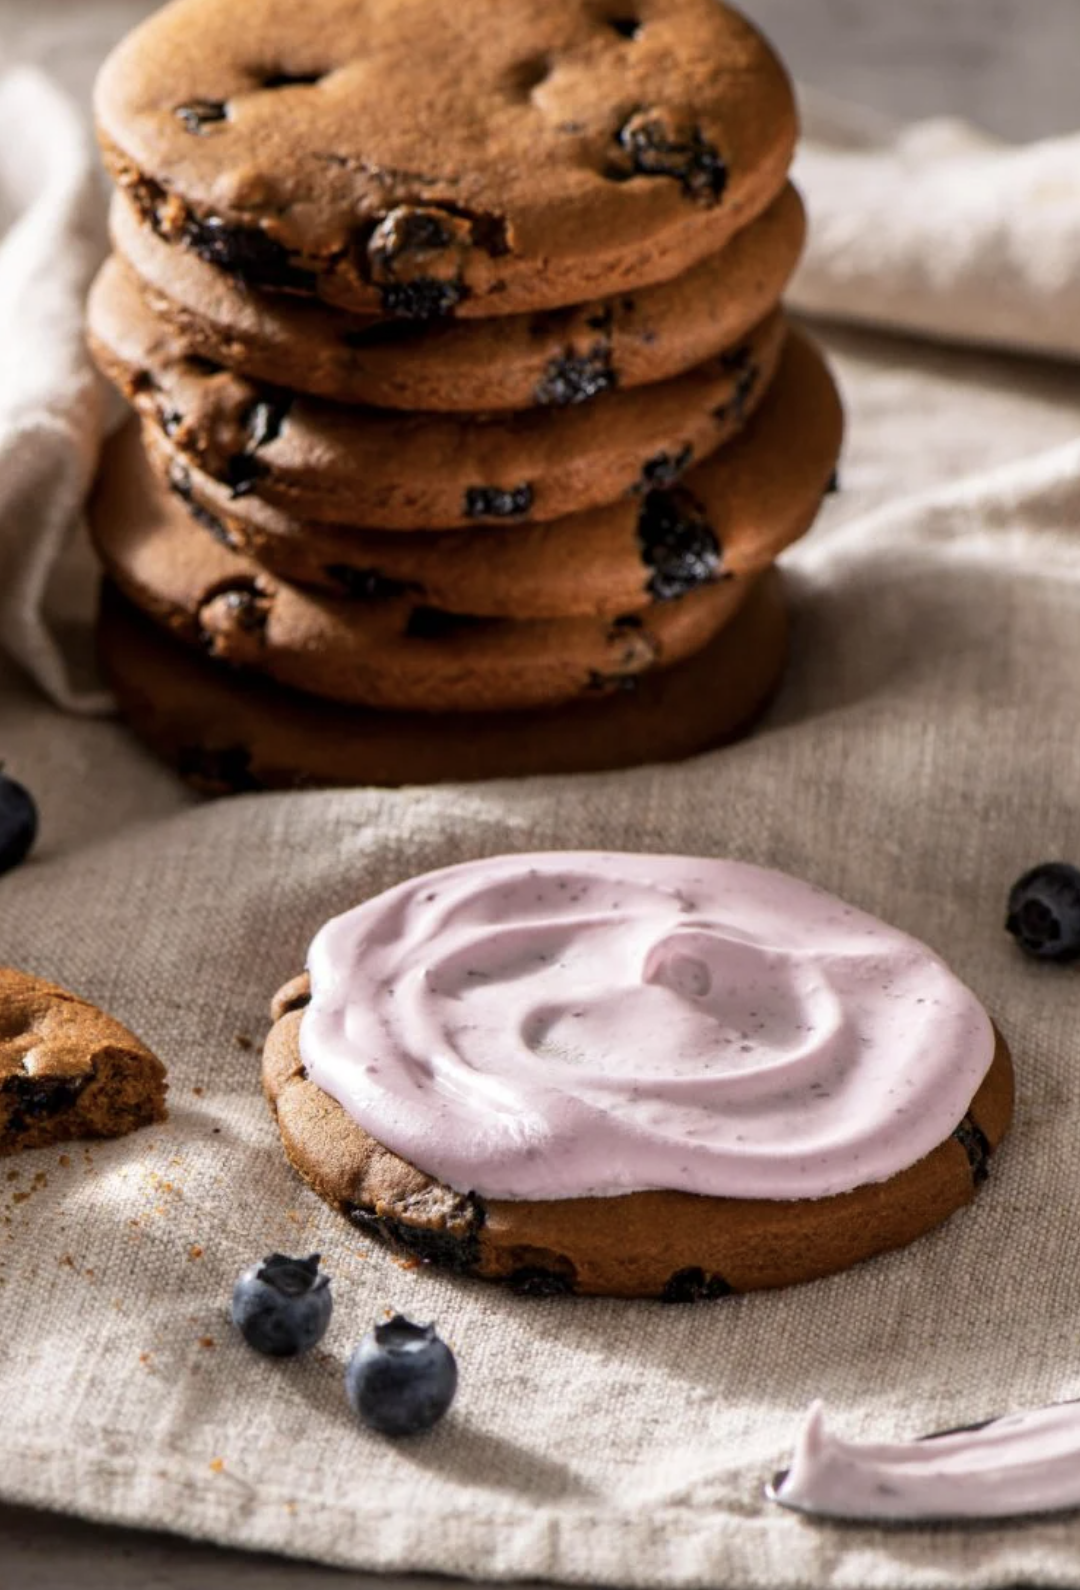 One frosted blueberry gingerbread cookie sits in front of a stack of unfrosted cookies